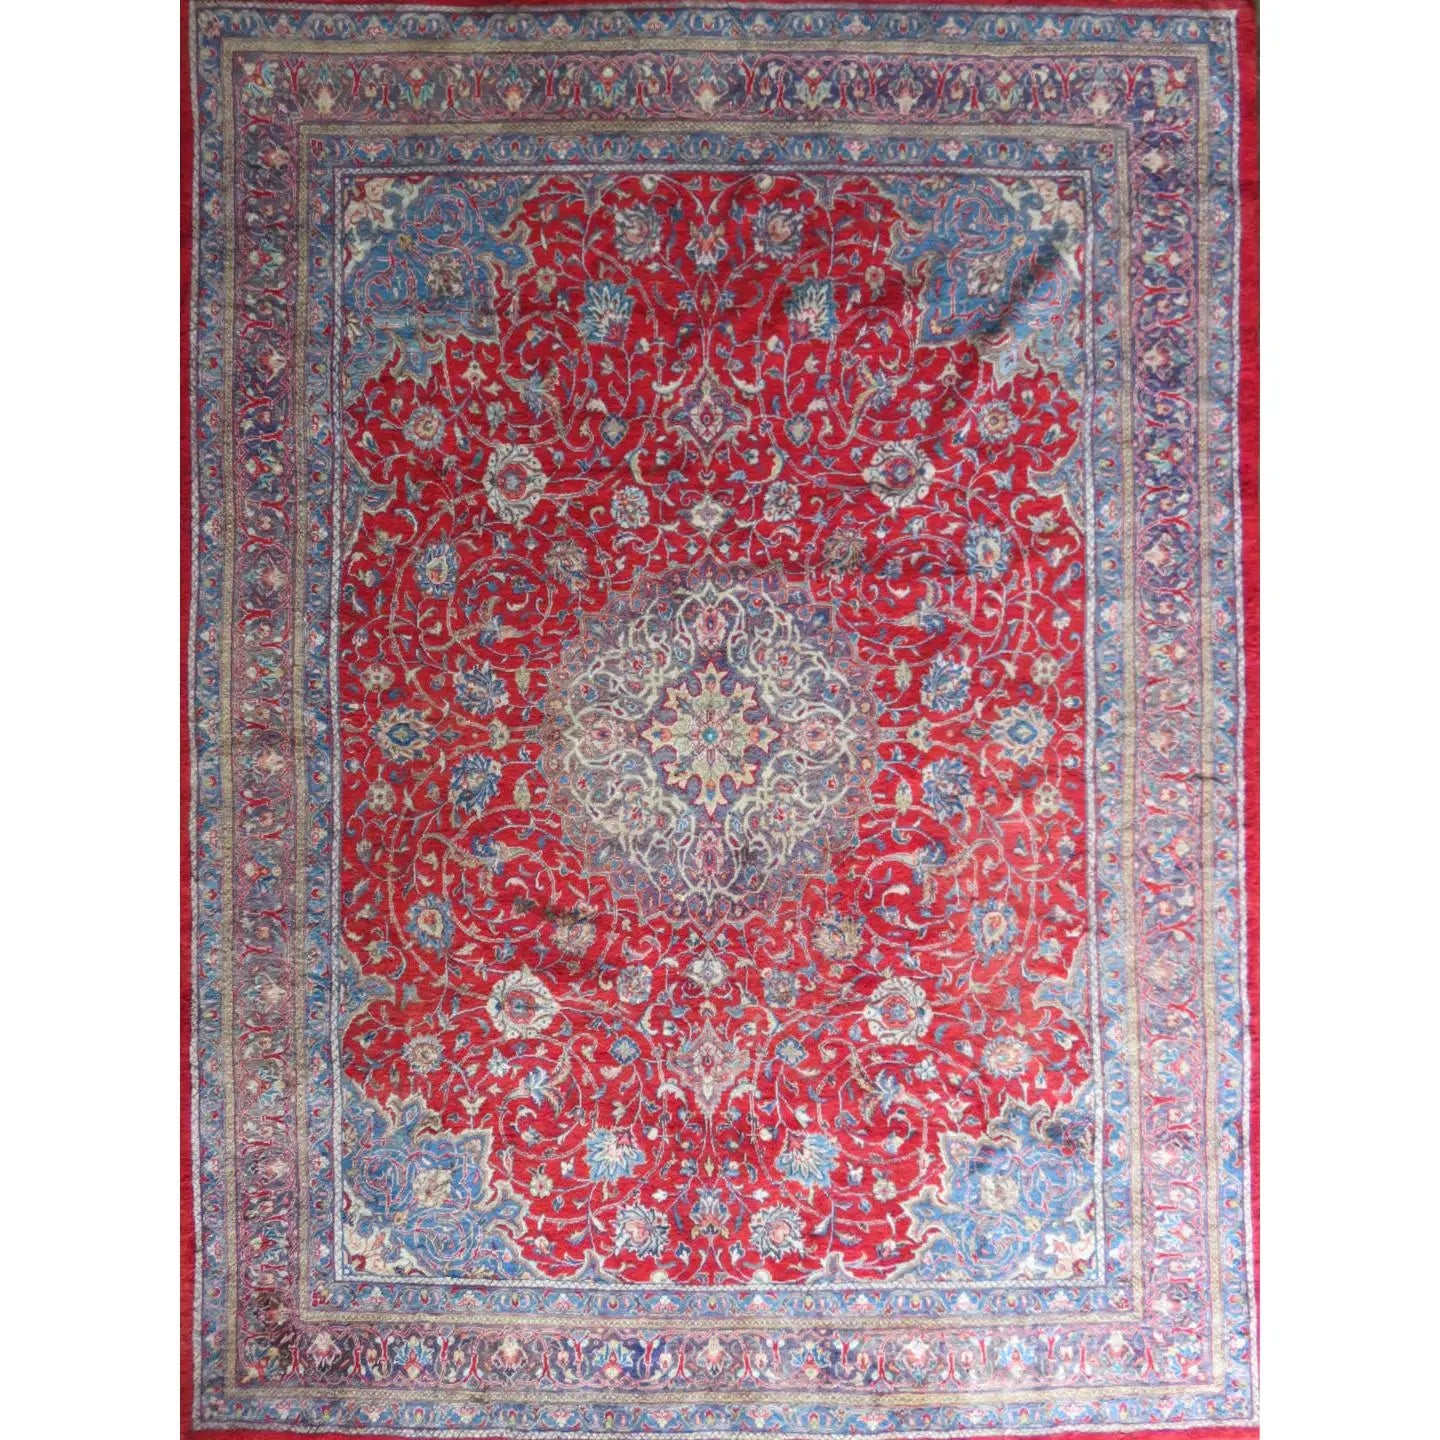 Hand-Knotted Persian Wool Rug – Luxurious Vintage Design, 13'1" x 9'8", Artisan Crafted